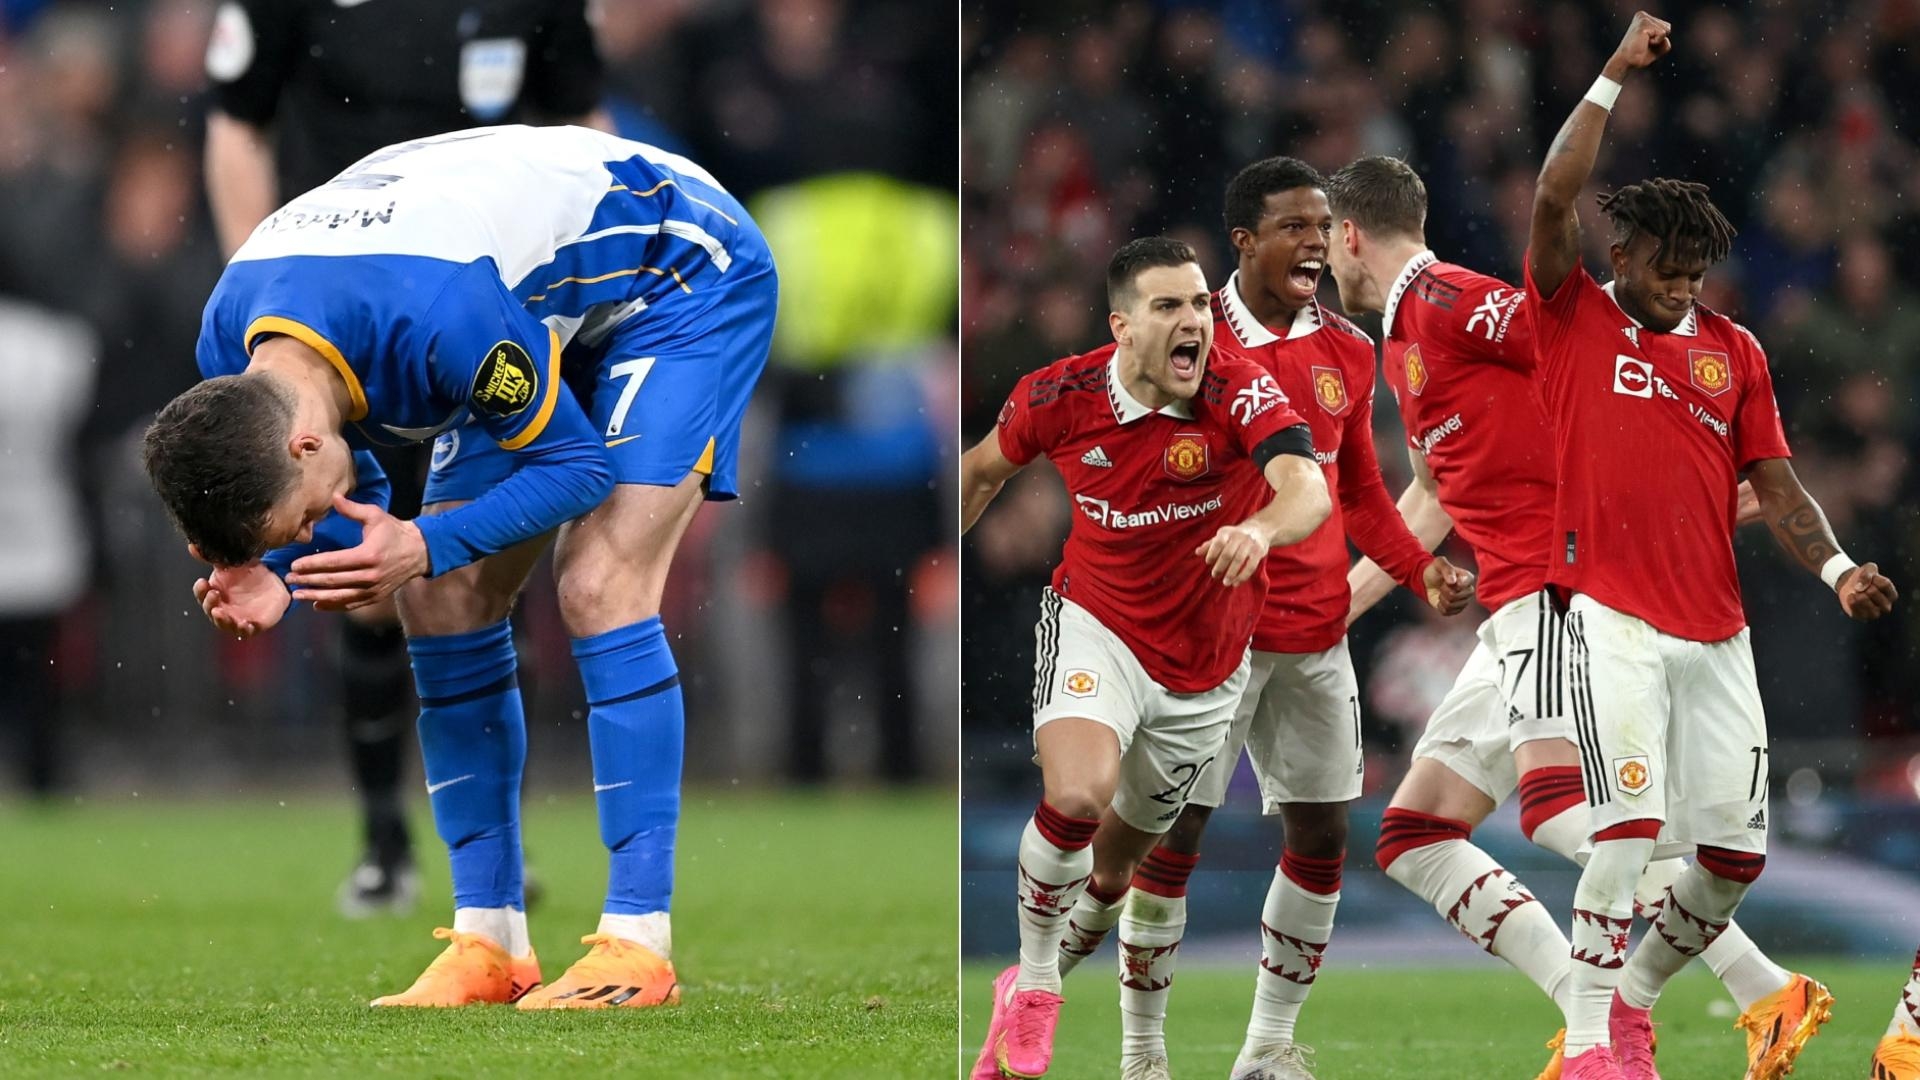 Man United prevail in penalties to reach FA Cup final - Stream the Video